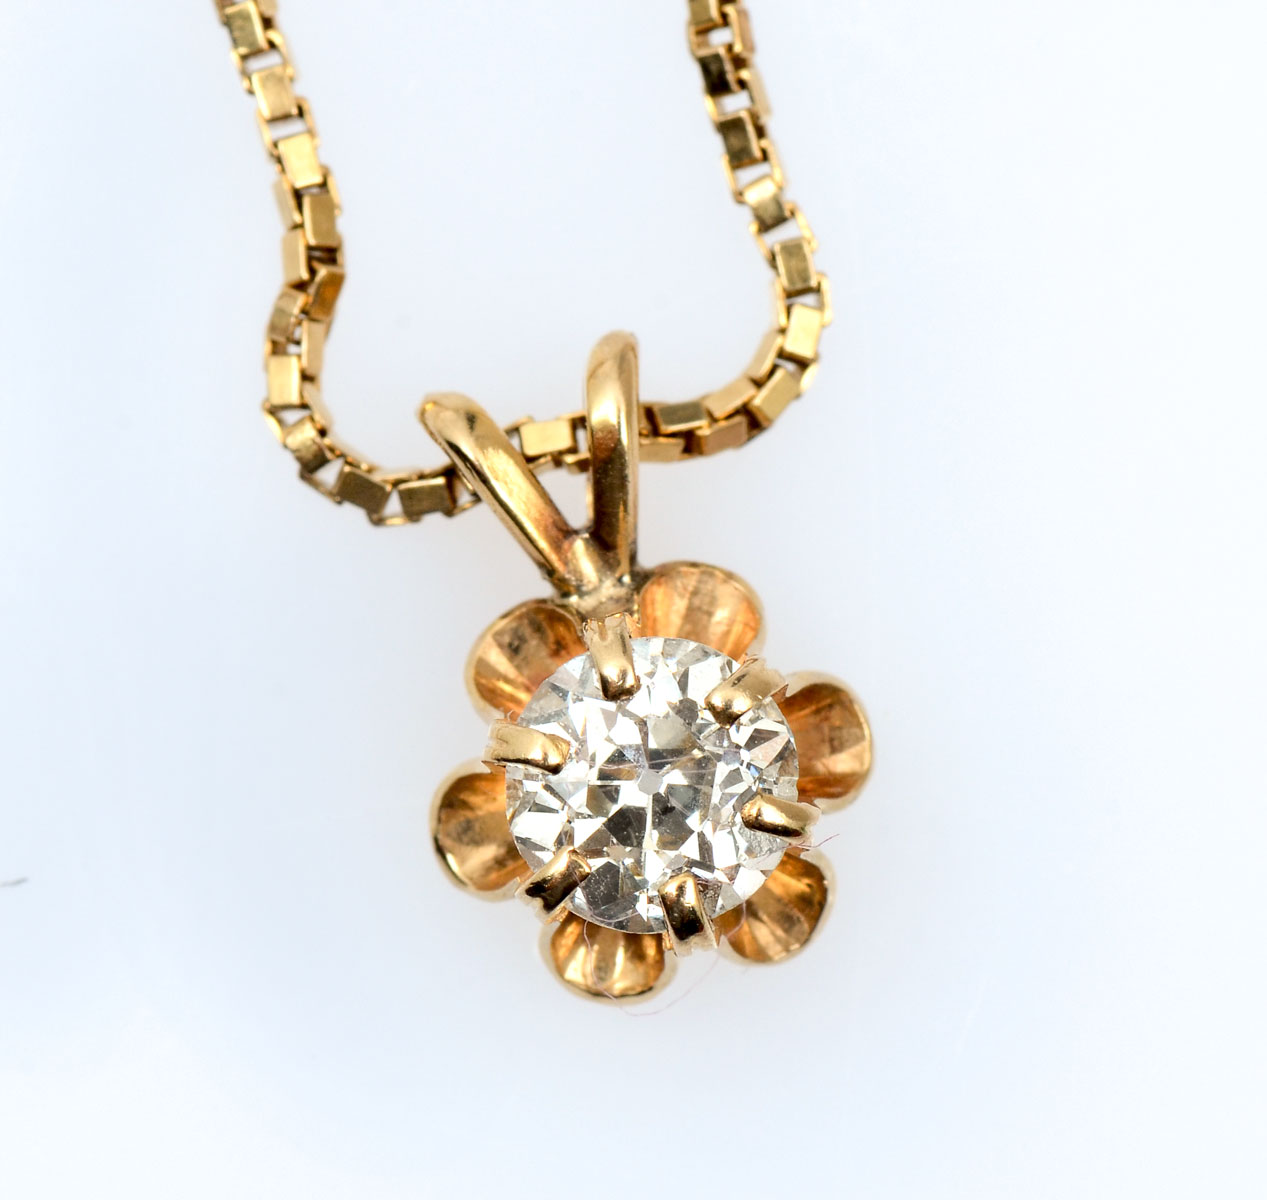 14K .5 CT BUTTER CUP DIAMOND NECKLACE: